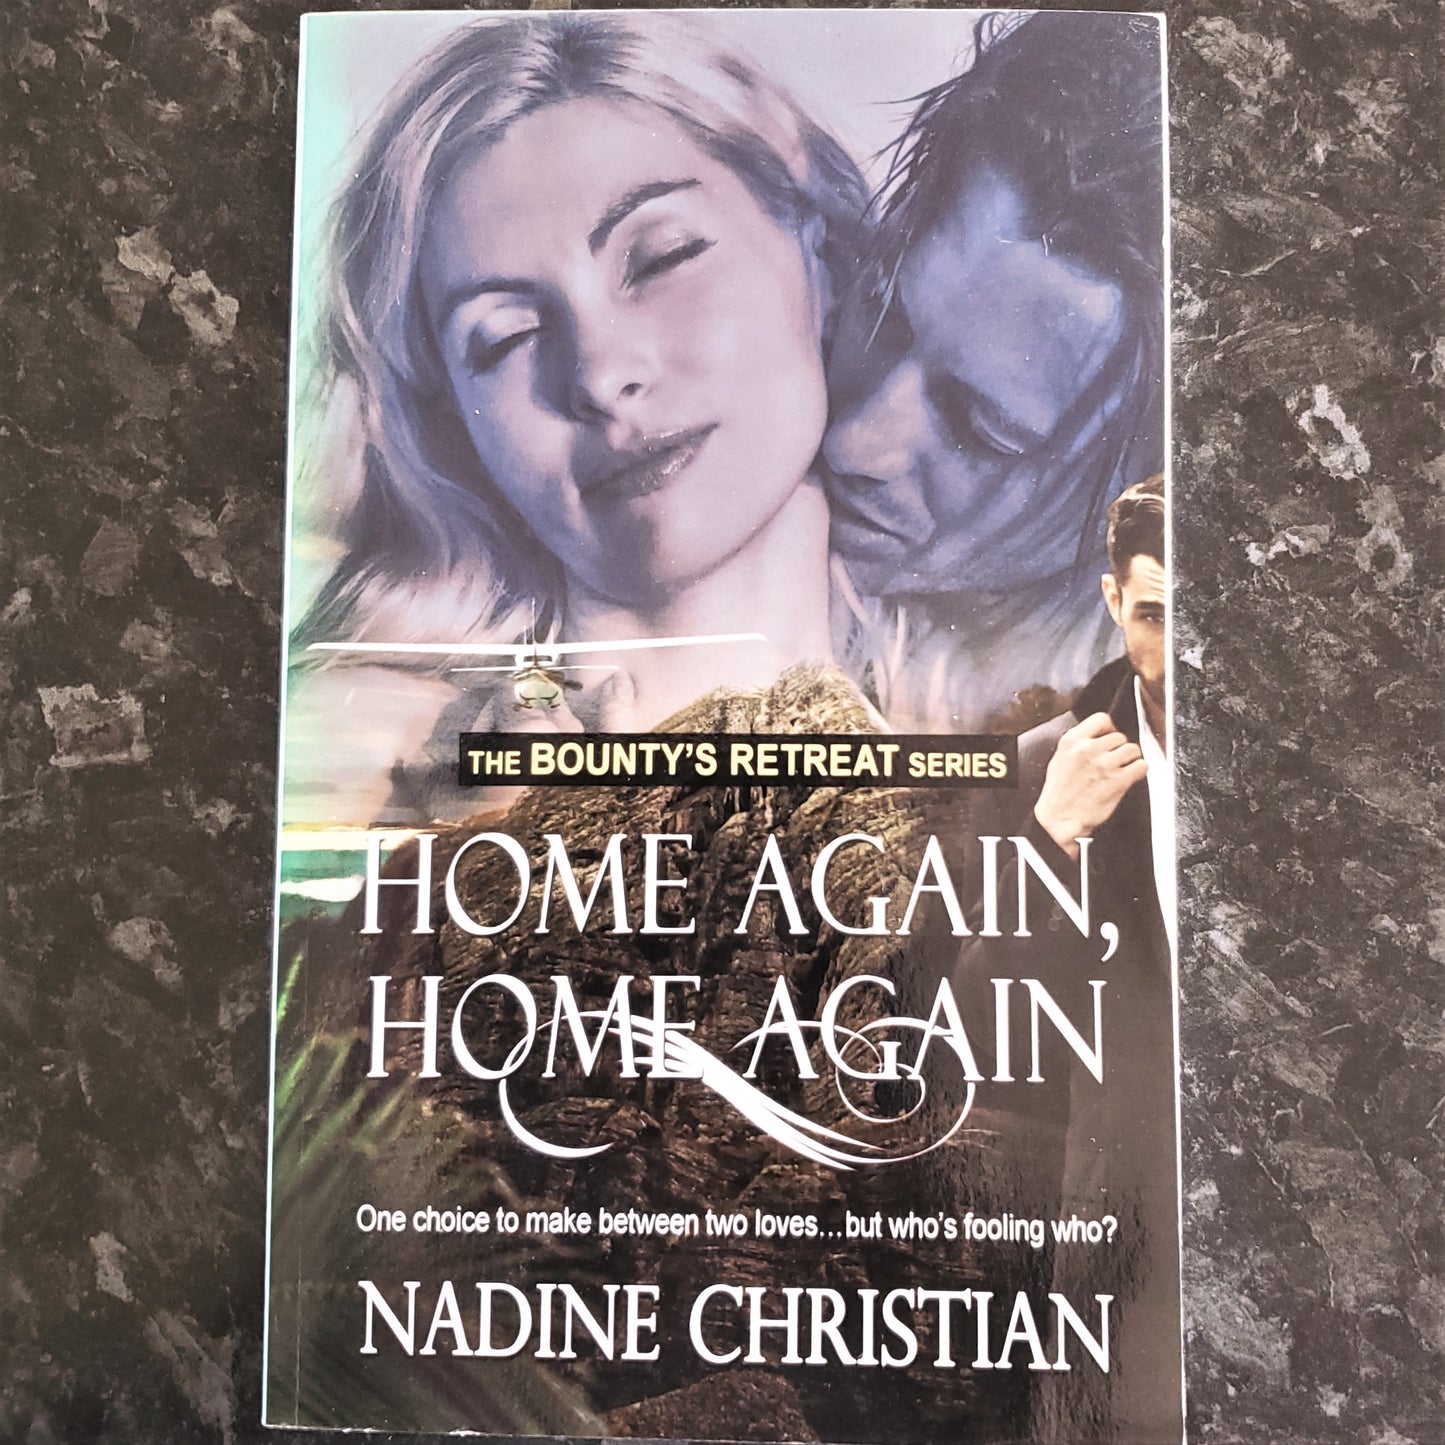 Home Again, Home Again - Book 2 of the Bounty's Retreat Series -  Signed by author Nadine Christian (now Faulkner)